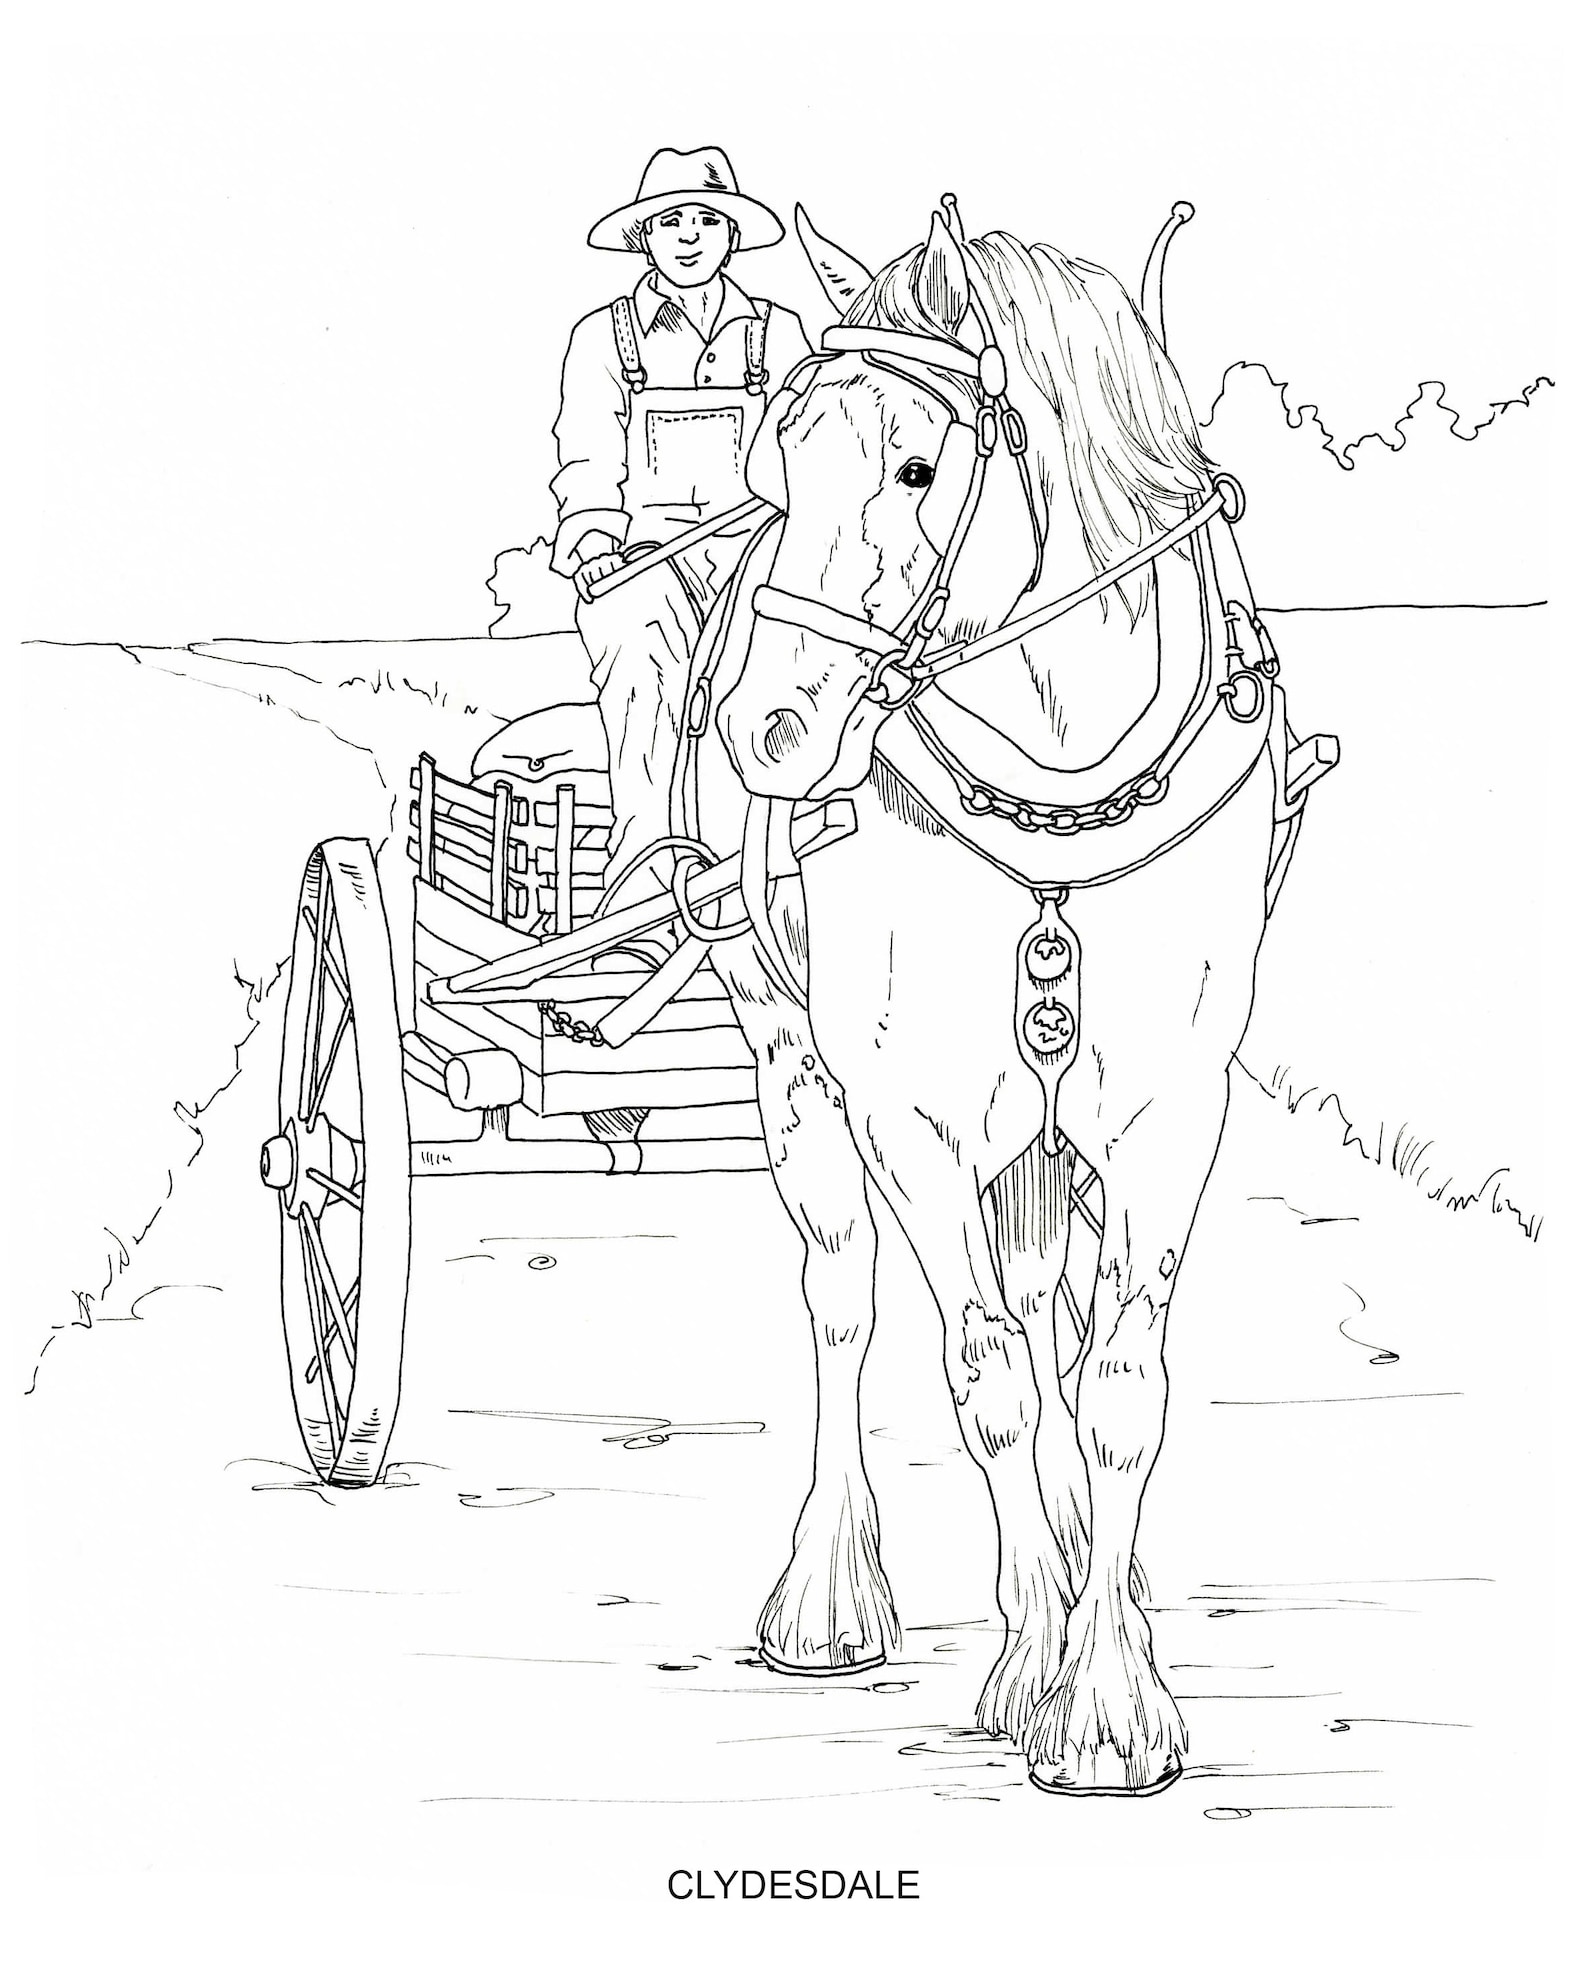 Horse Breeds Coloring Pages